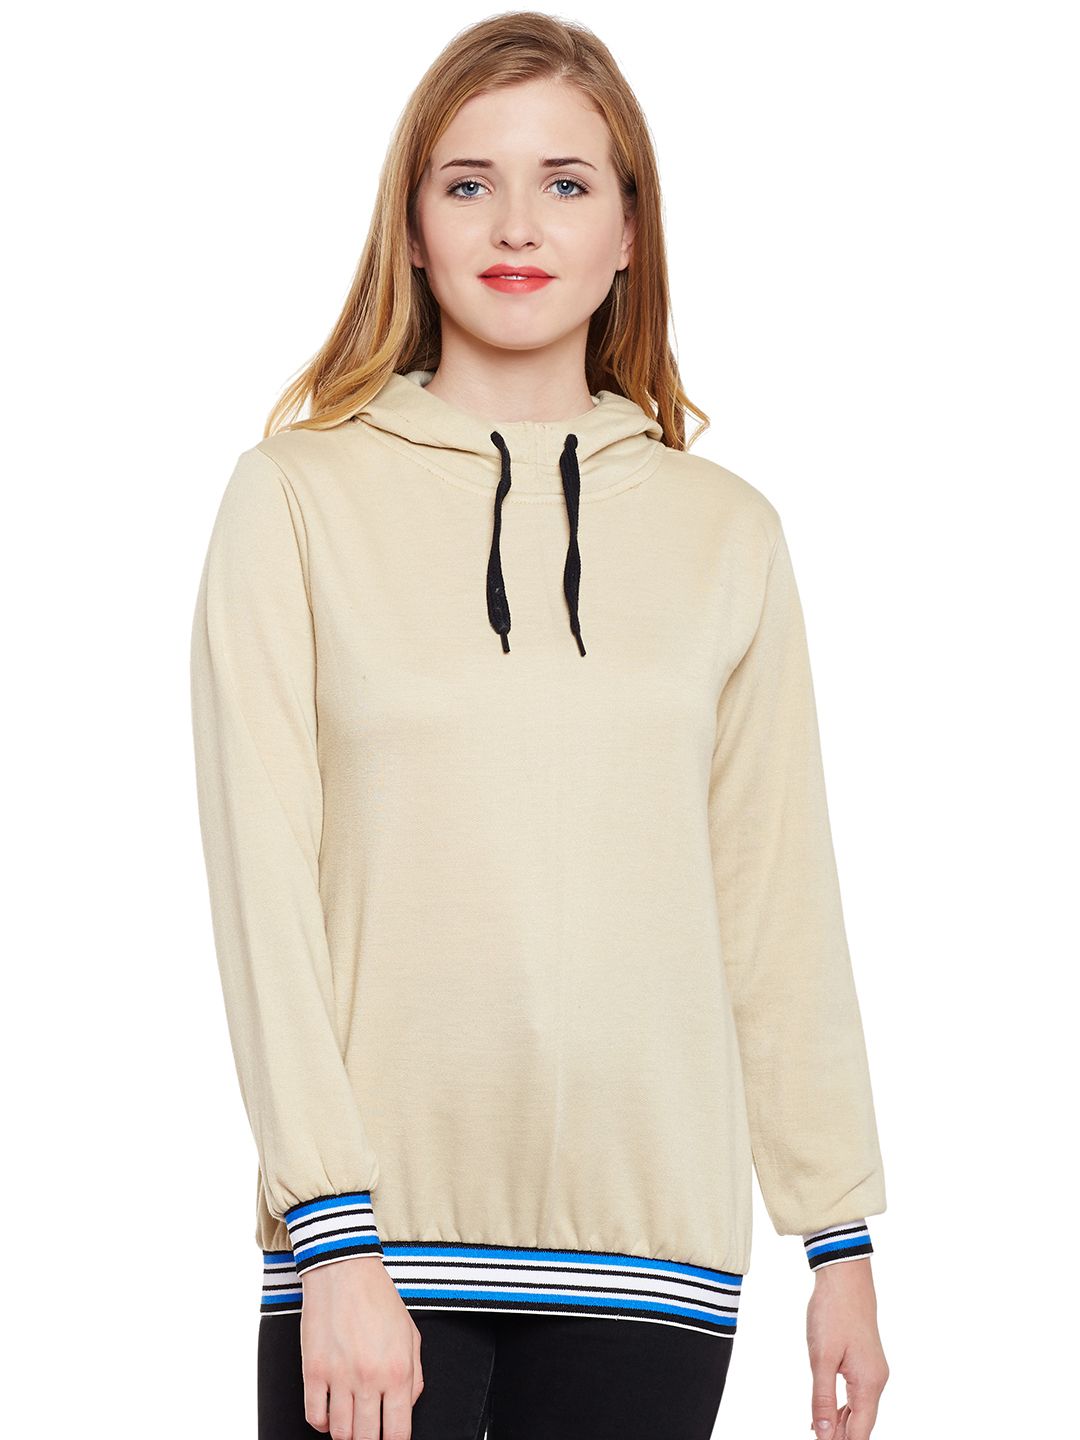 Belle Fille Women Nude-Coloured Solid Hooded Sweatshirt Price in India